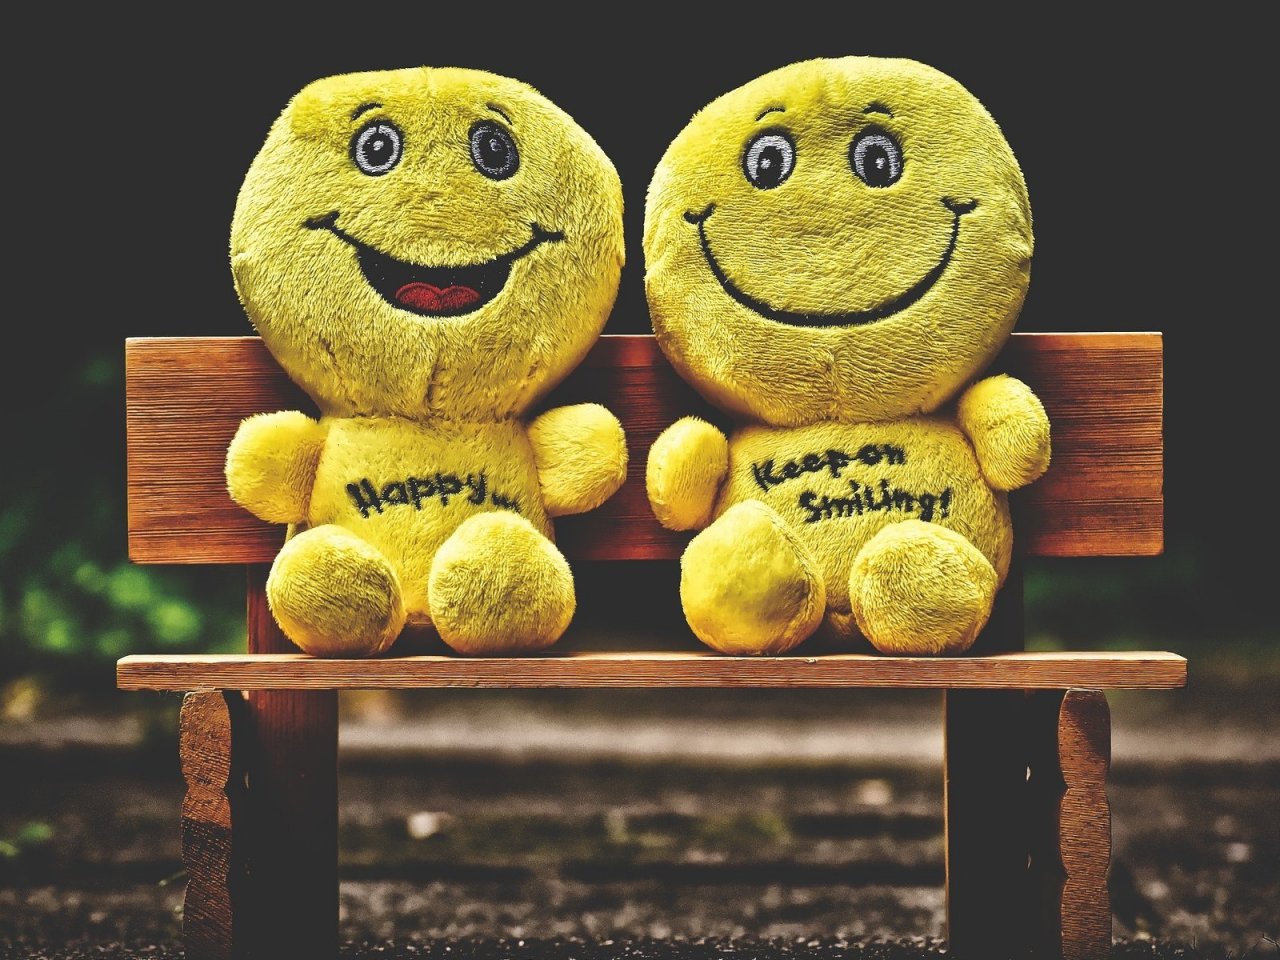 Smileys on the bench jigsaw puzzle